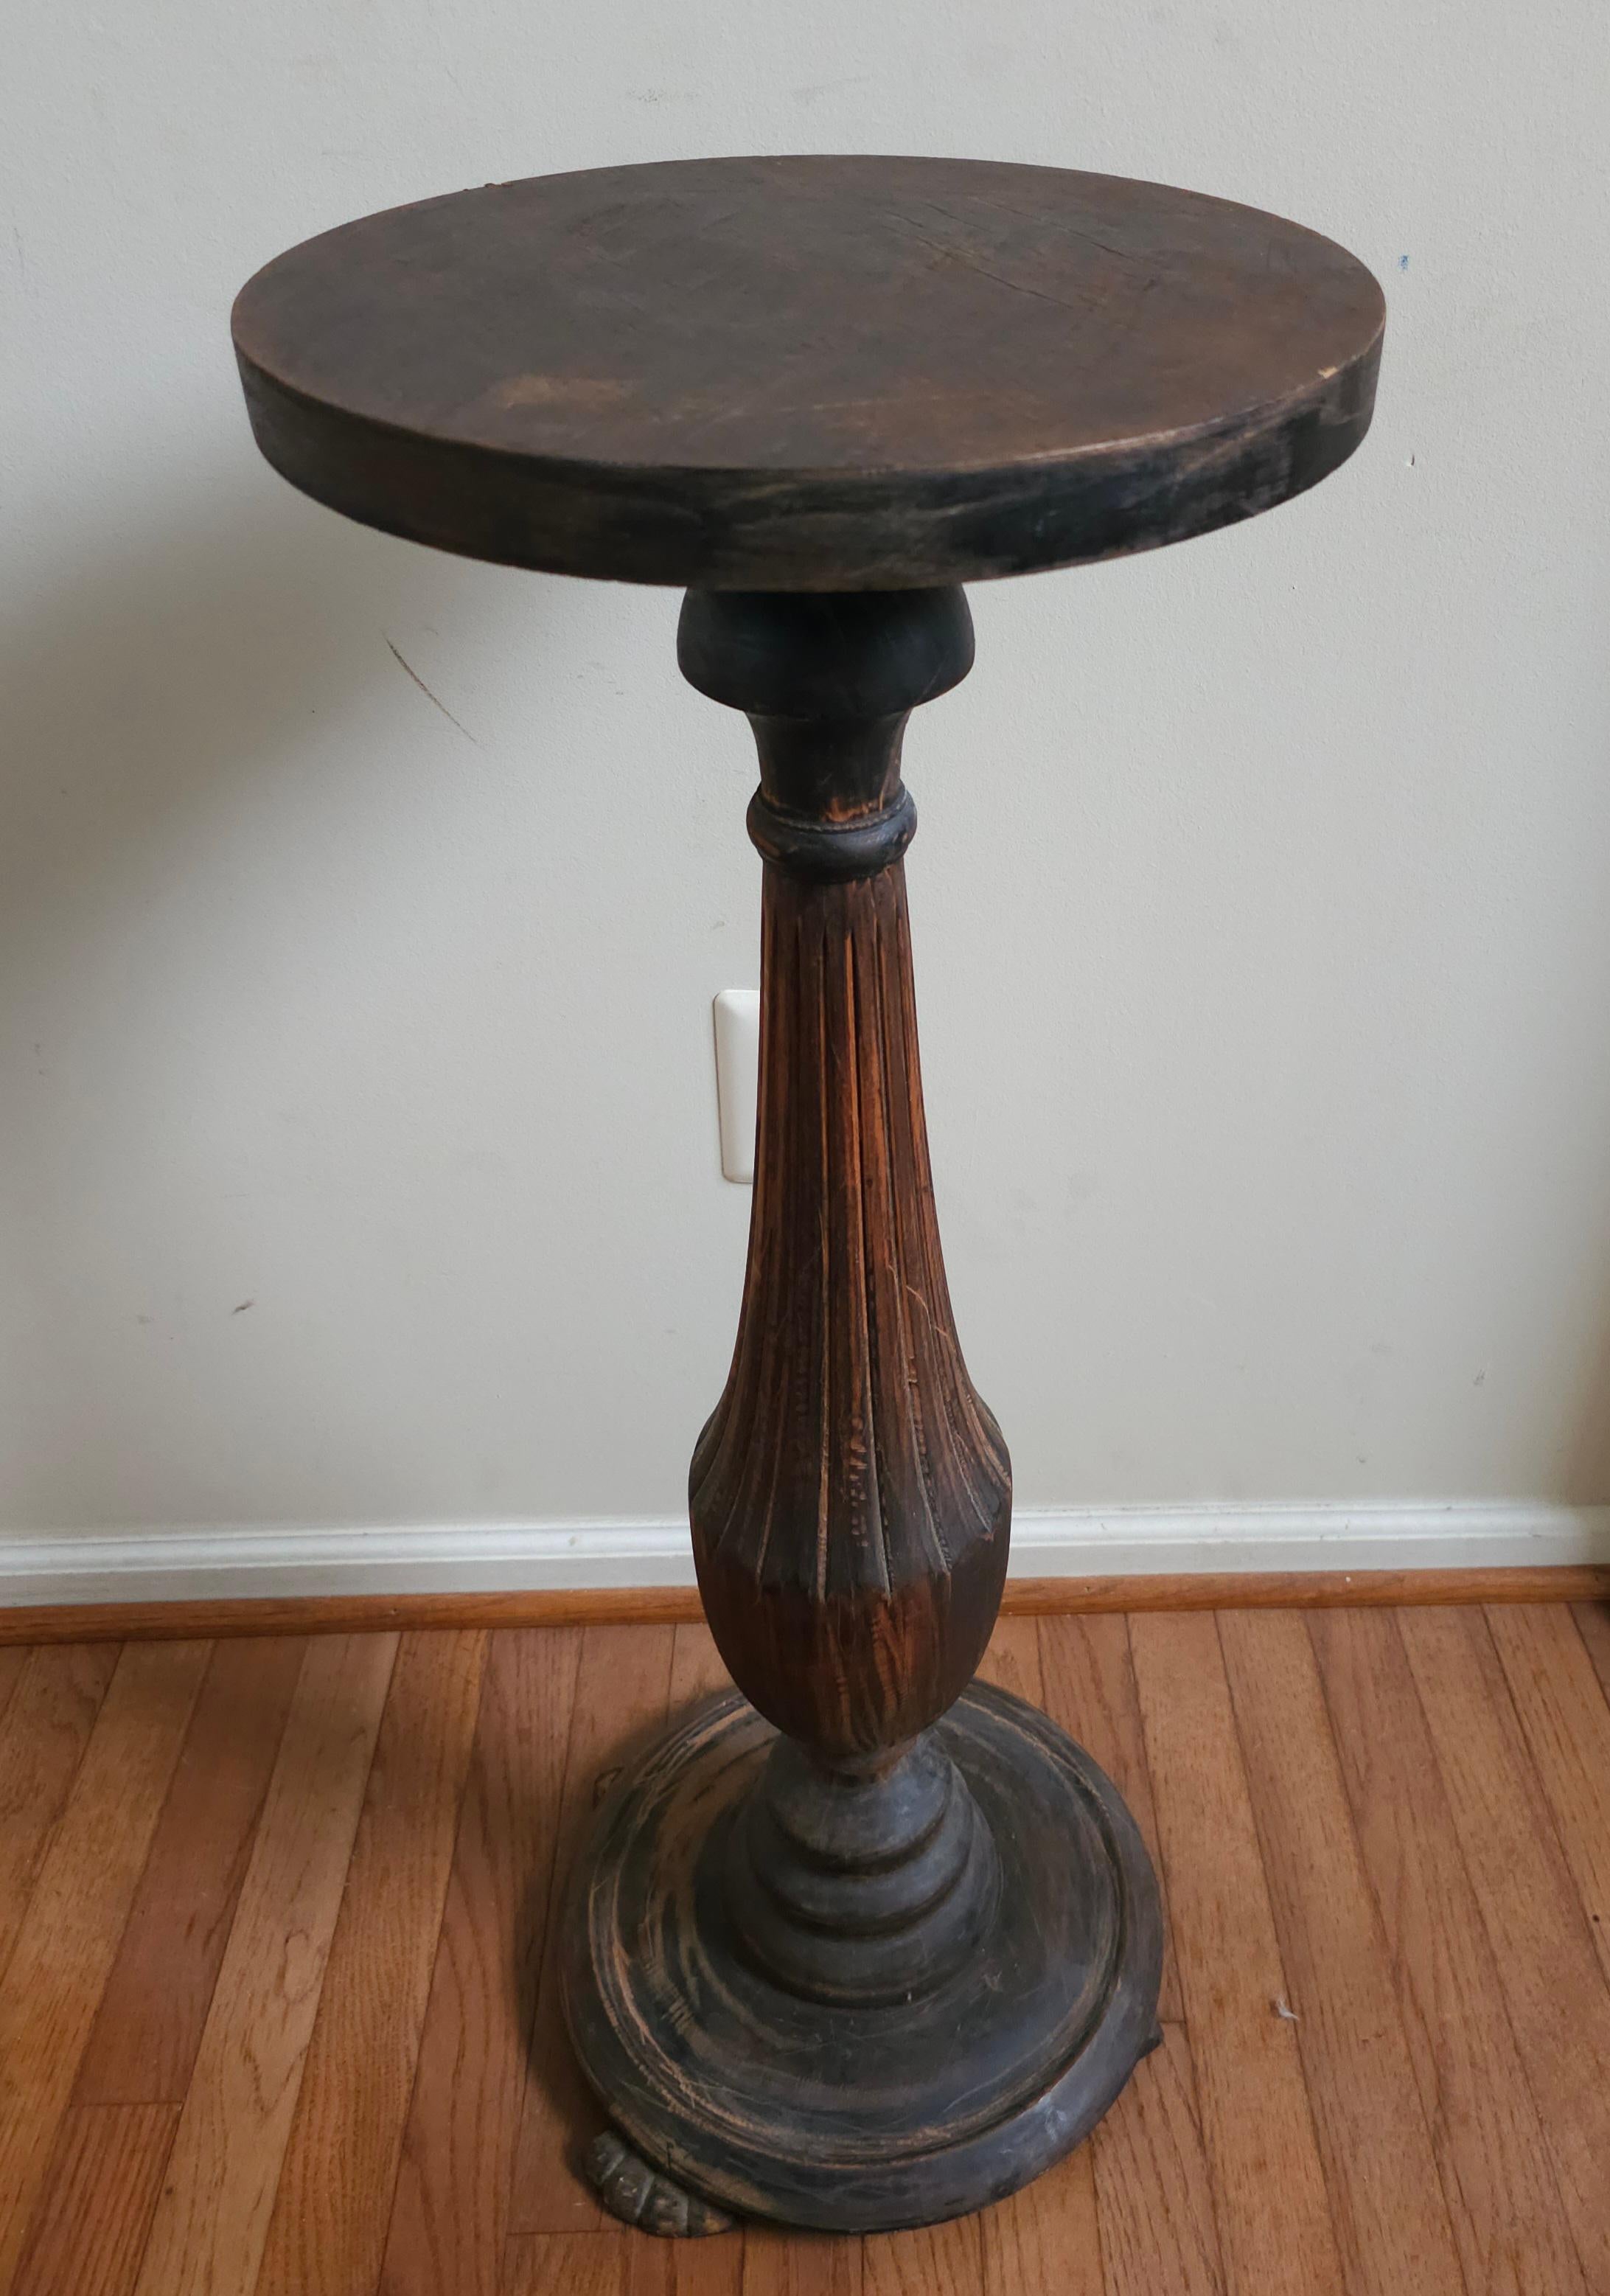 19th Century Georgian Walnut Patinated Pedestal Plant Stand In Good Condition For Sale In Germantown, MD